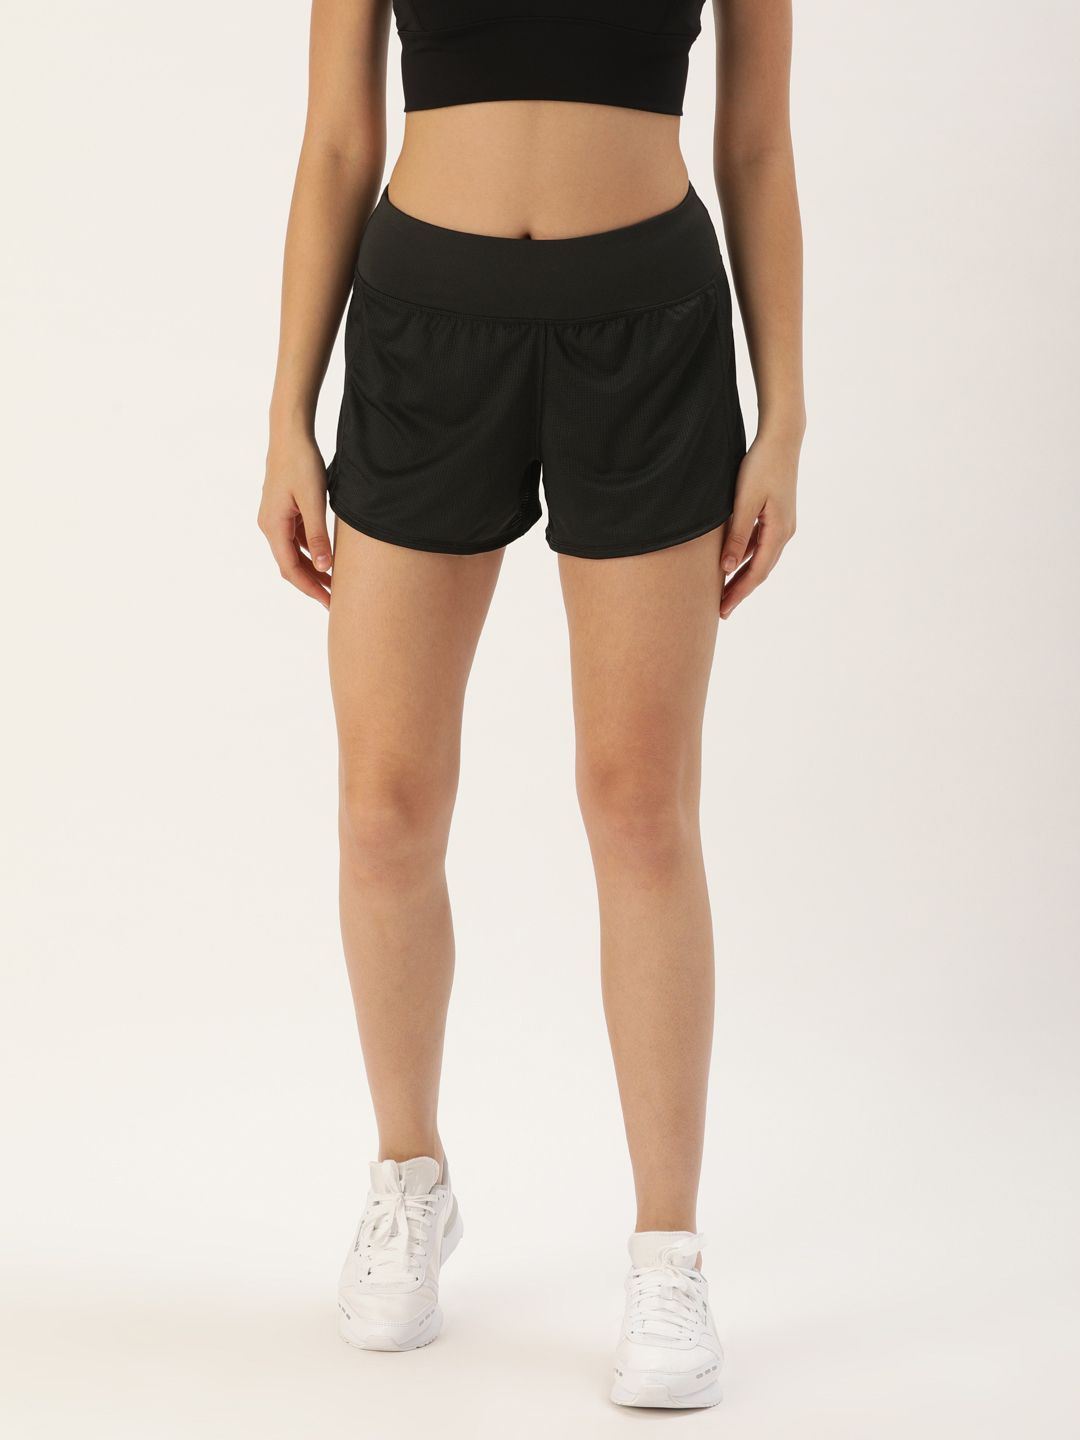 Enamor Women Athleisure Black Solid Dry-Fit Relaxed Fit Training Shorts Price in India